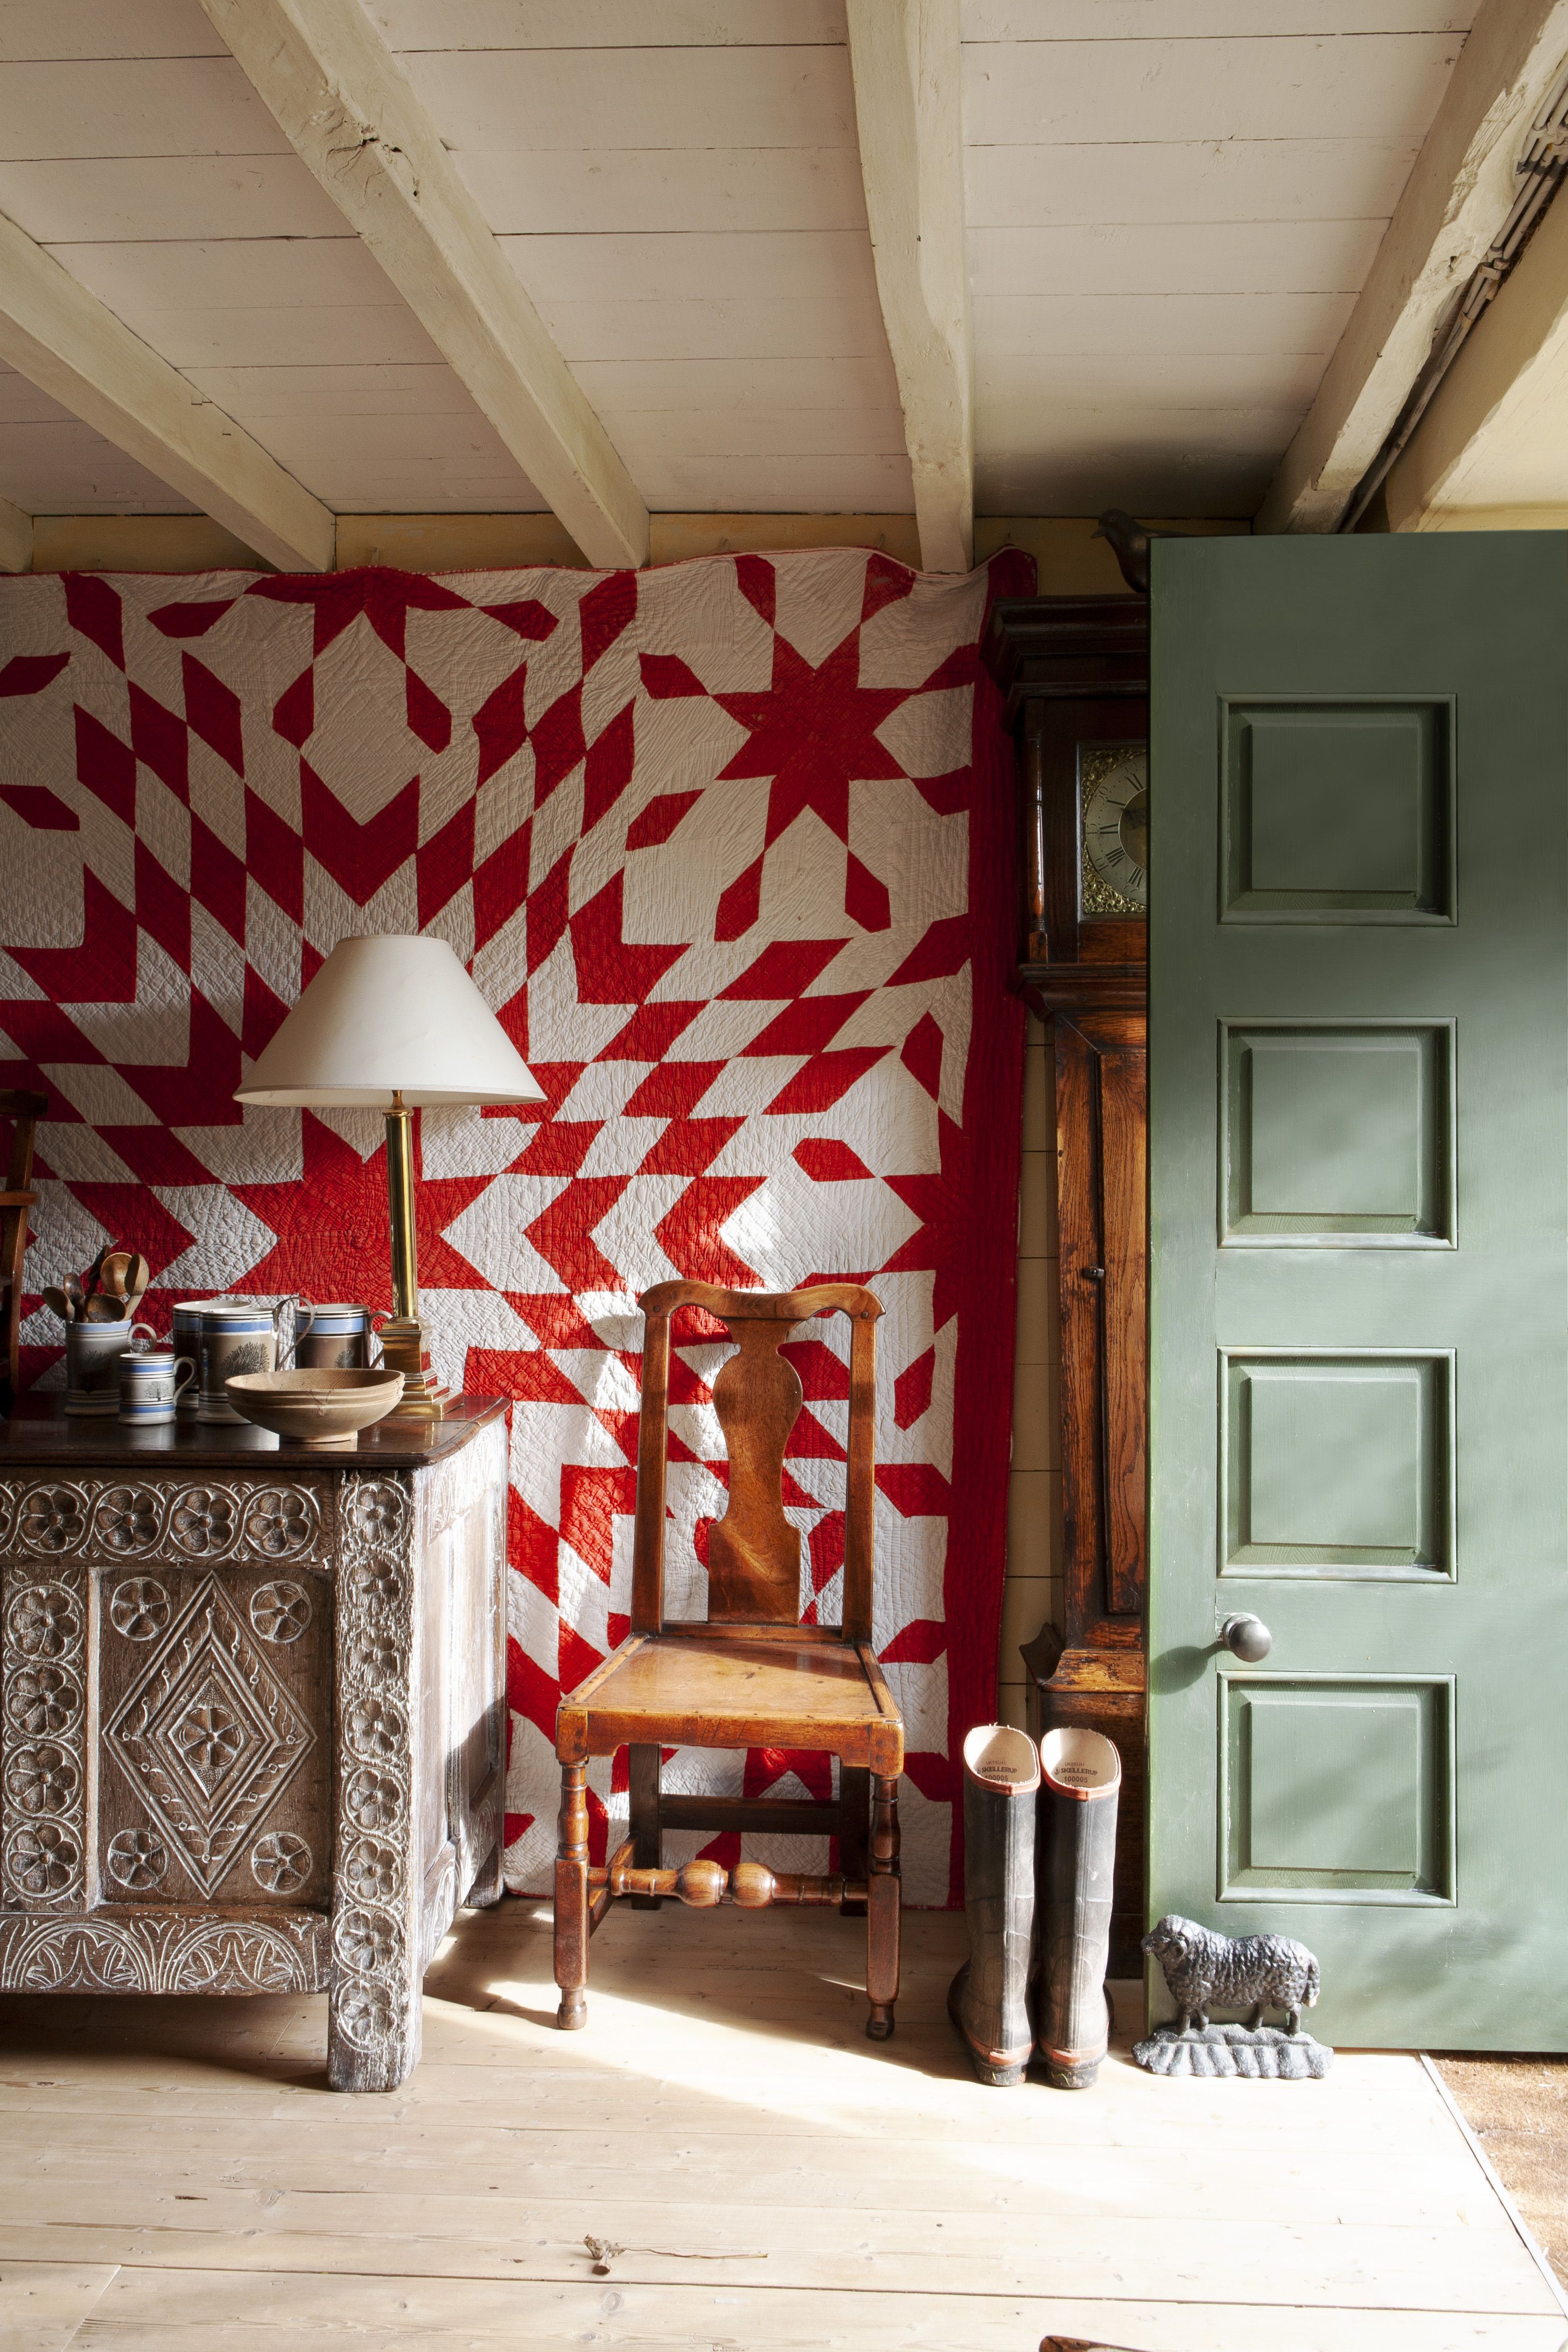 Creative Ways Of Decorating With Fabric Around The Home